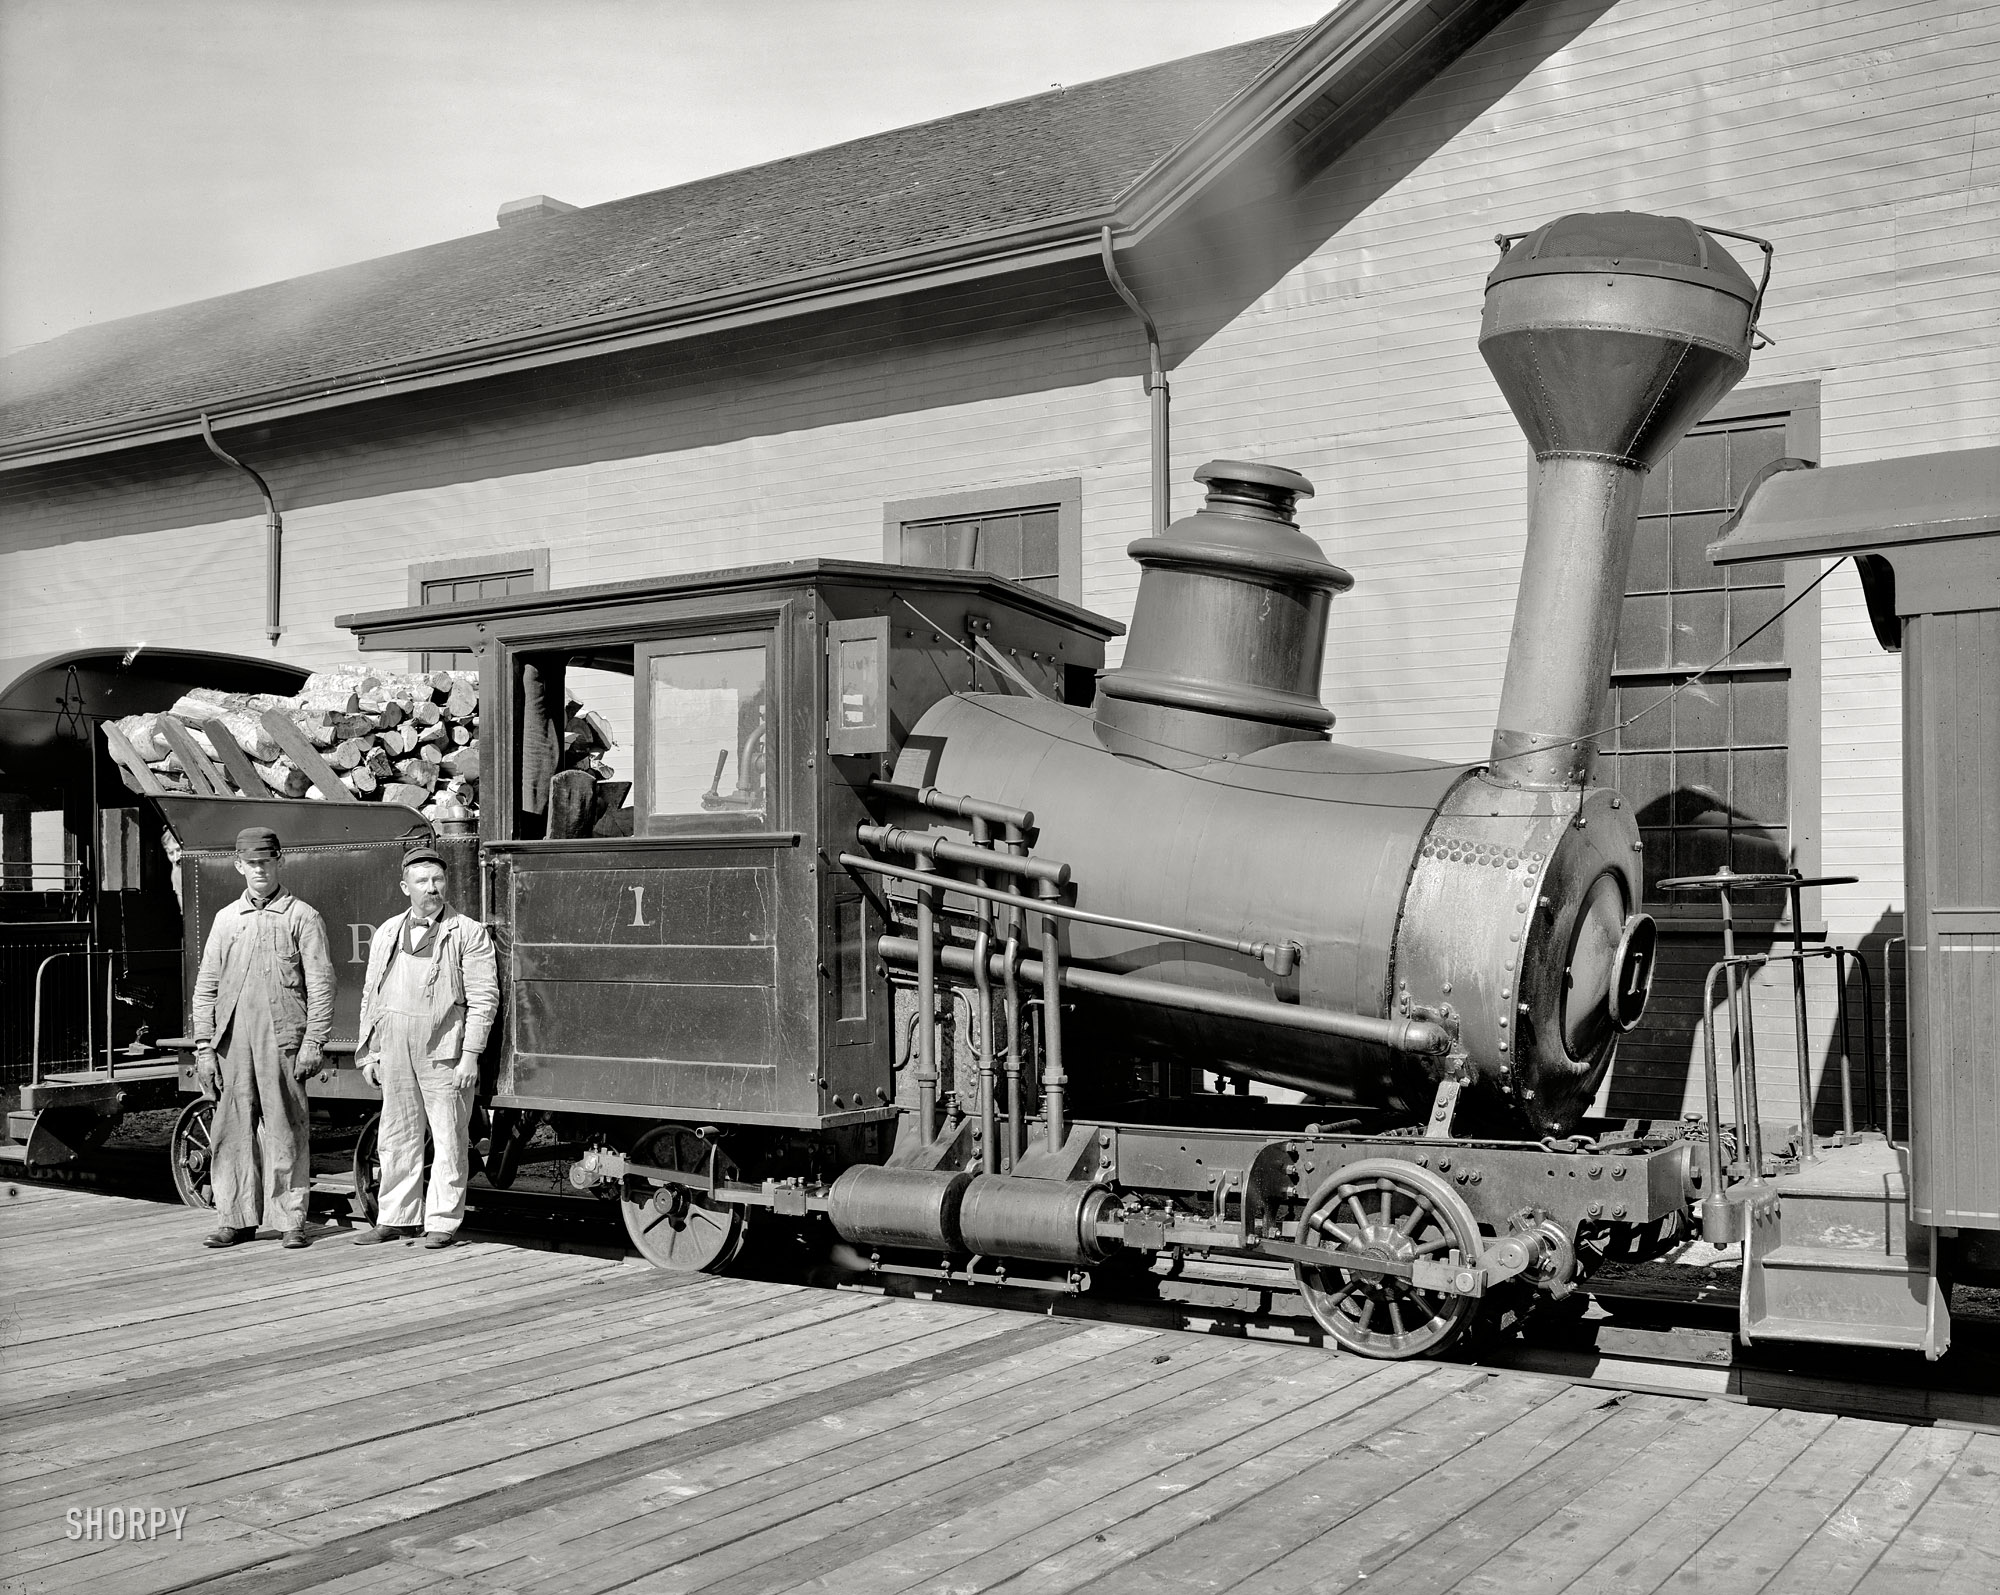 Circa 1906. "Engine, Mount Washington Railway, White Mountains, New Hampshire." The little engine that could also serve as a portable pizza oven. 8x10 inch dry plate glass negative, Detroit Publishing Company. View full size.